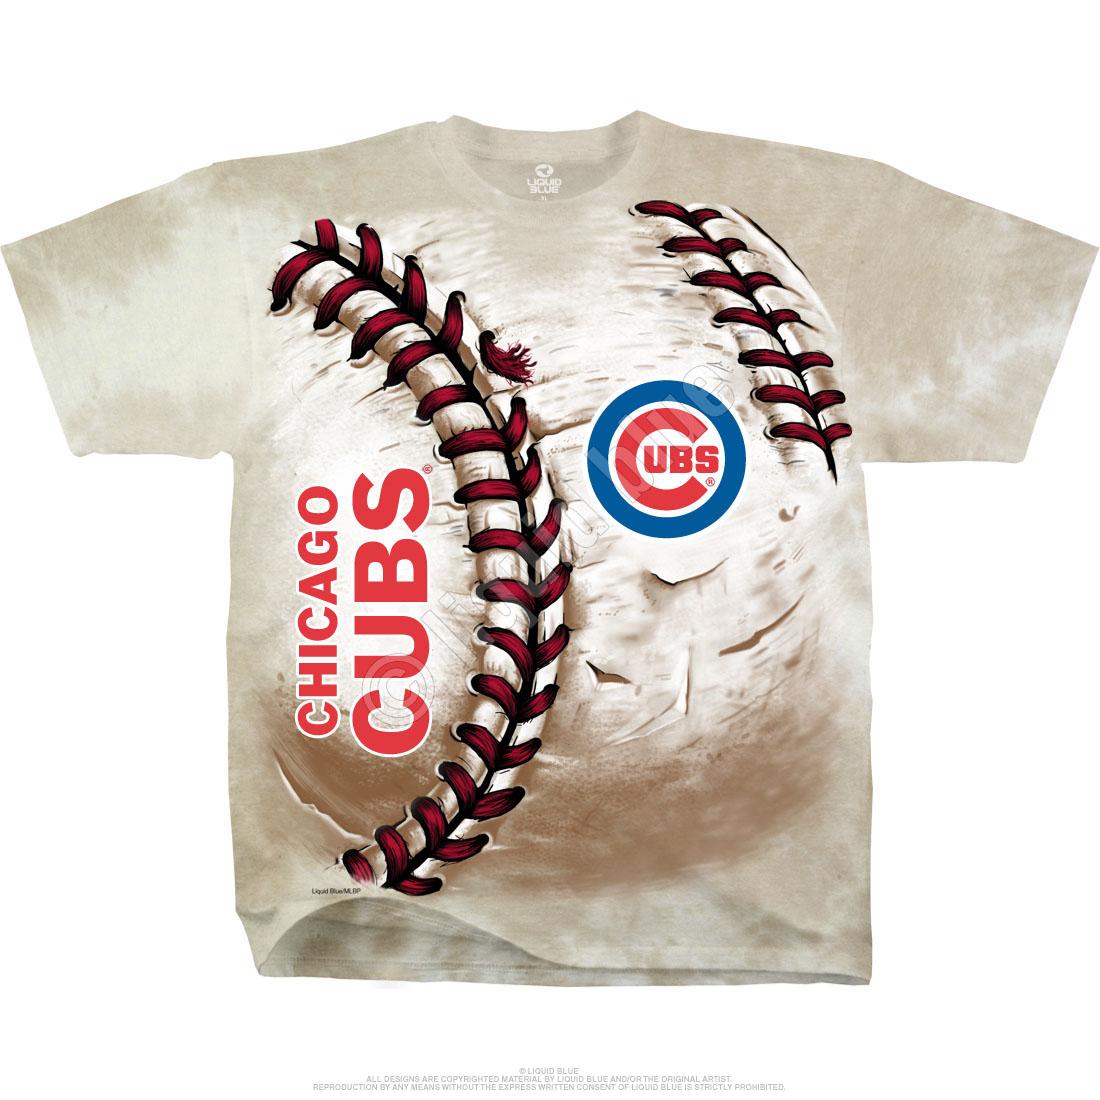 Chicago Cubs Women's Concepts Sport Dynamic T-Shirt - Blue/Red Small